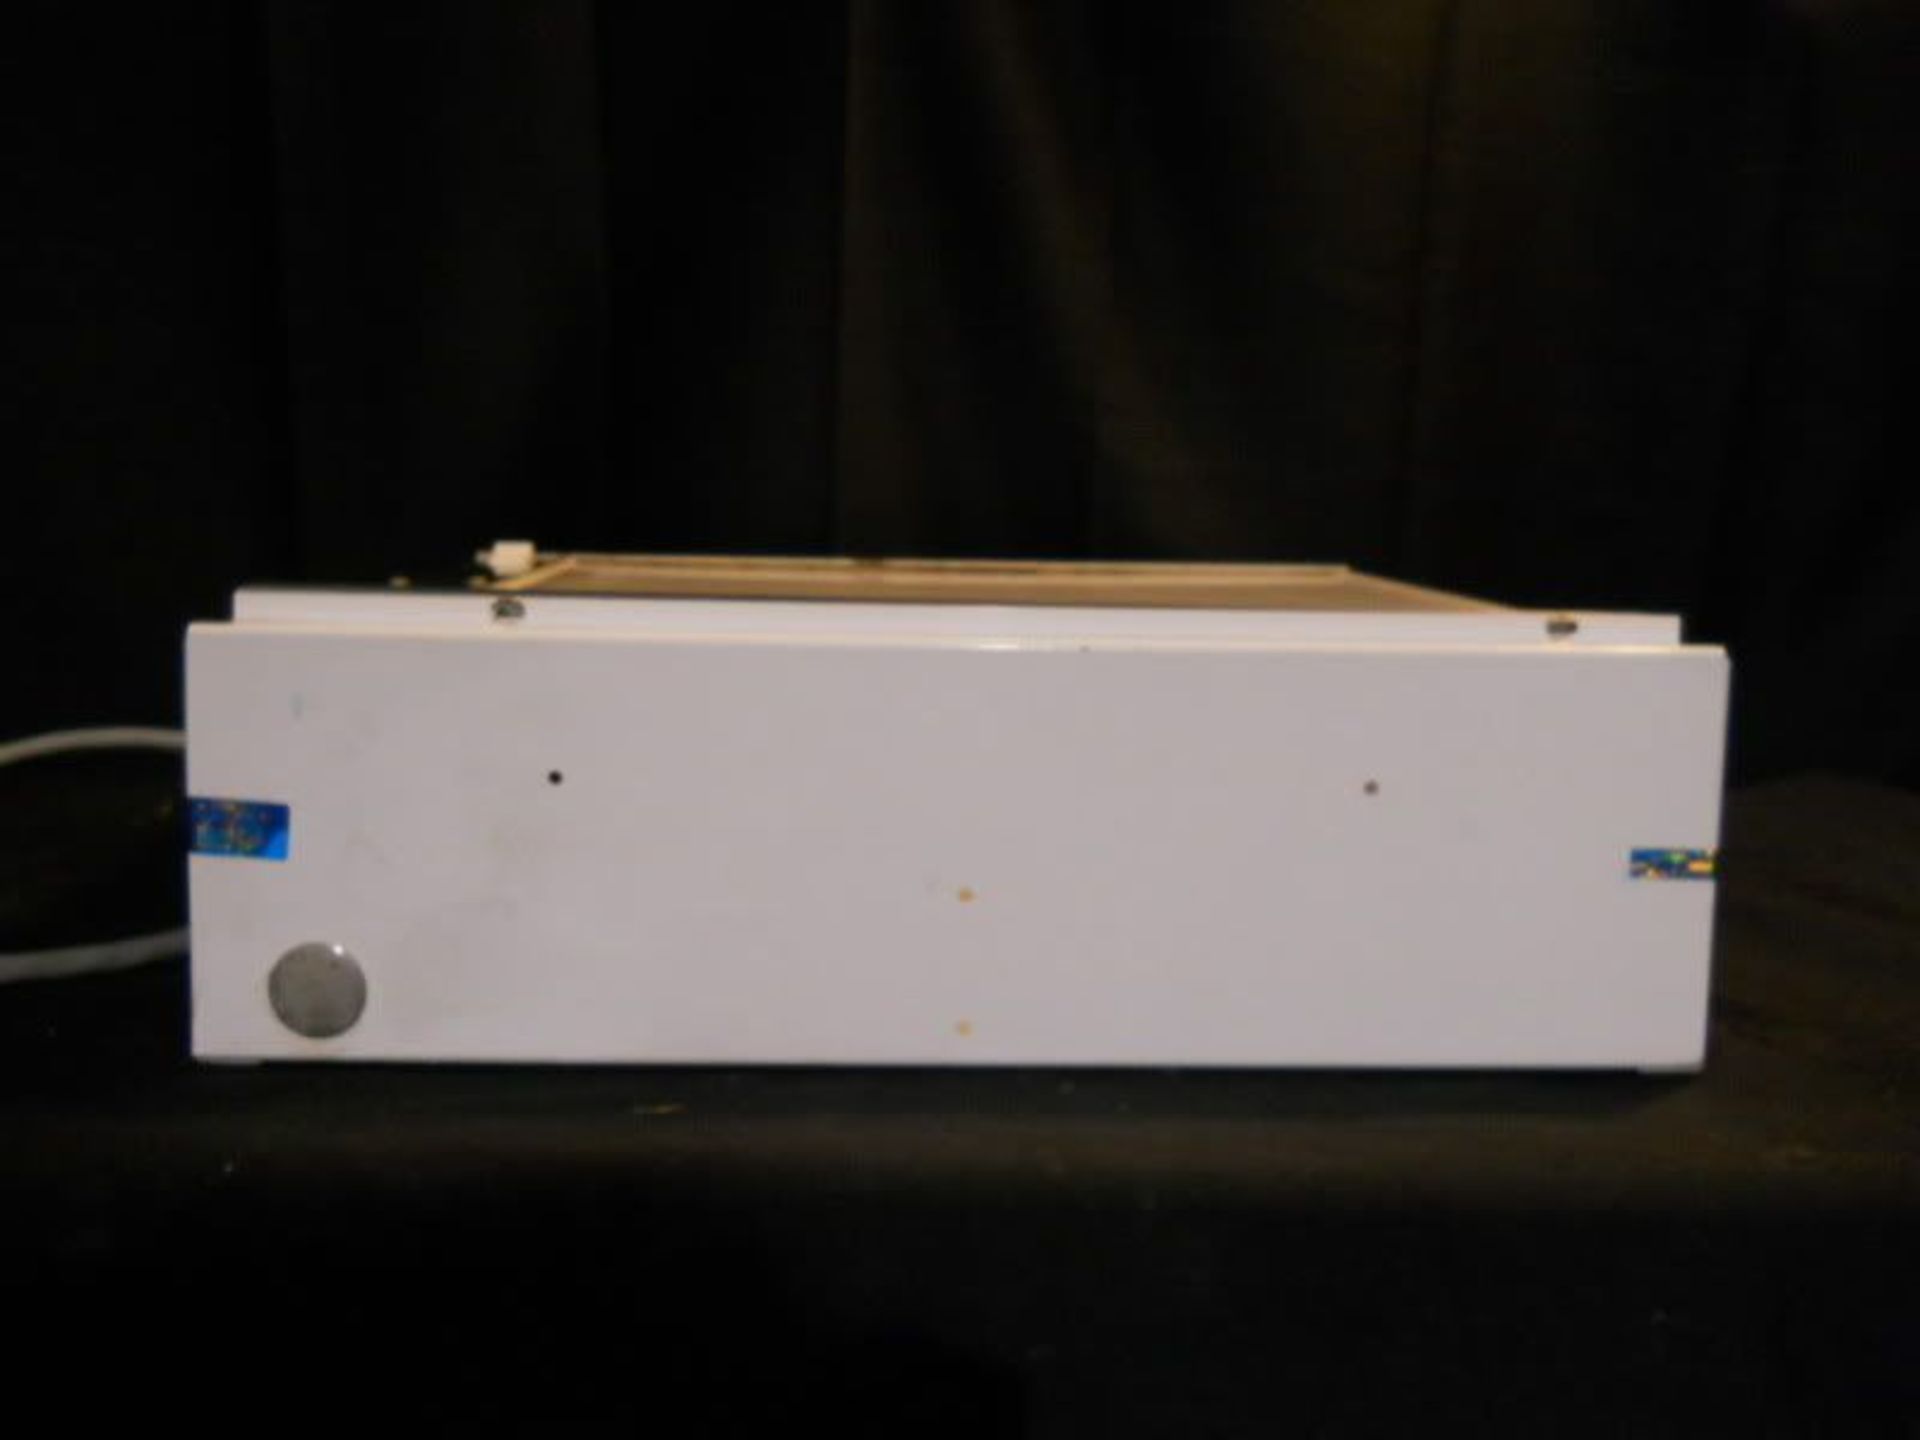 General Electric X-Ray Viewer (XRay) 16"x14.5" Viewing Area, Qty 1, 321468992096 - Image 6 of 7